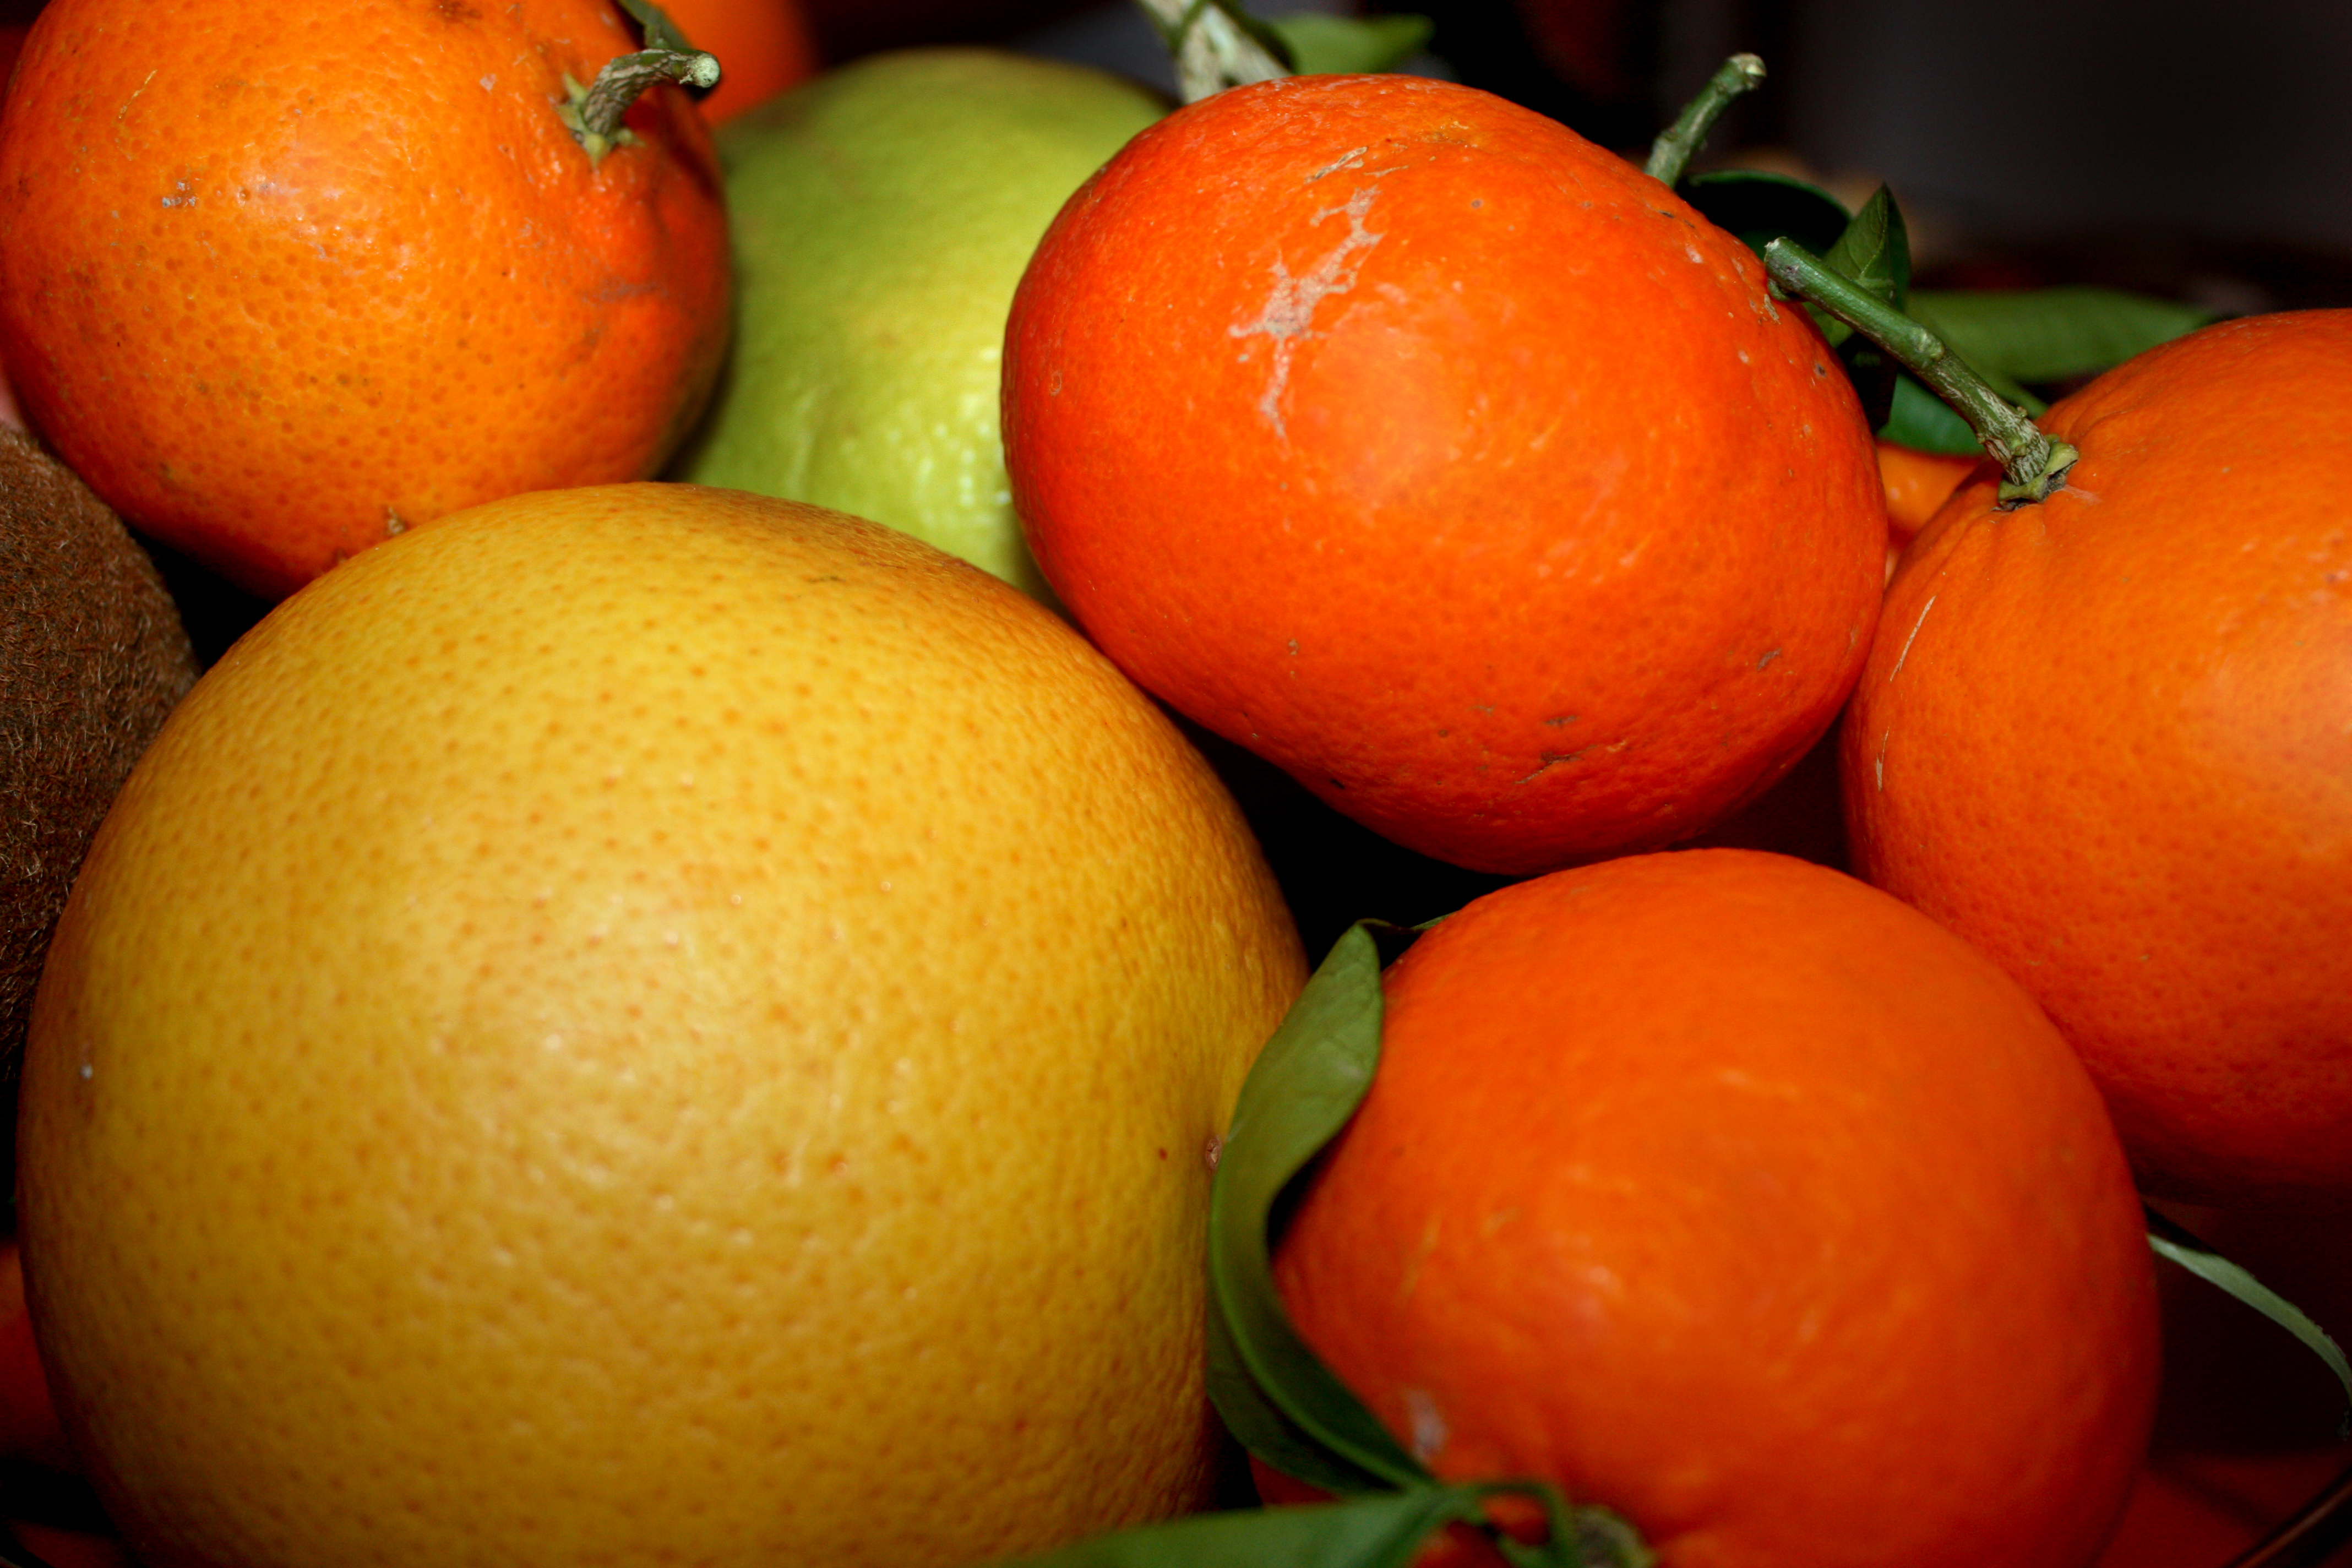 What's The Difference Between Mandarins, Clementines, And Tangerines?